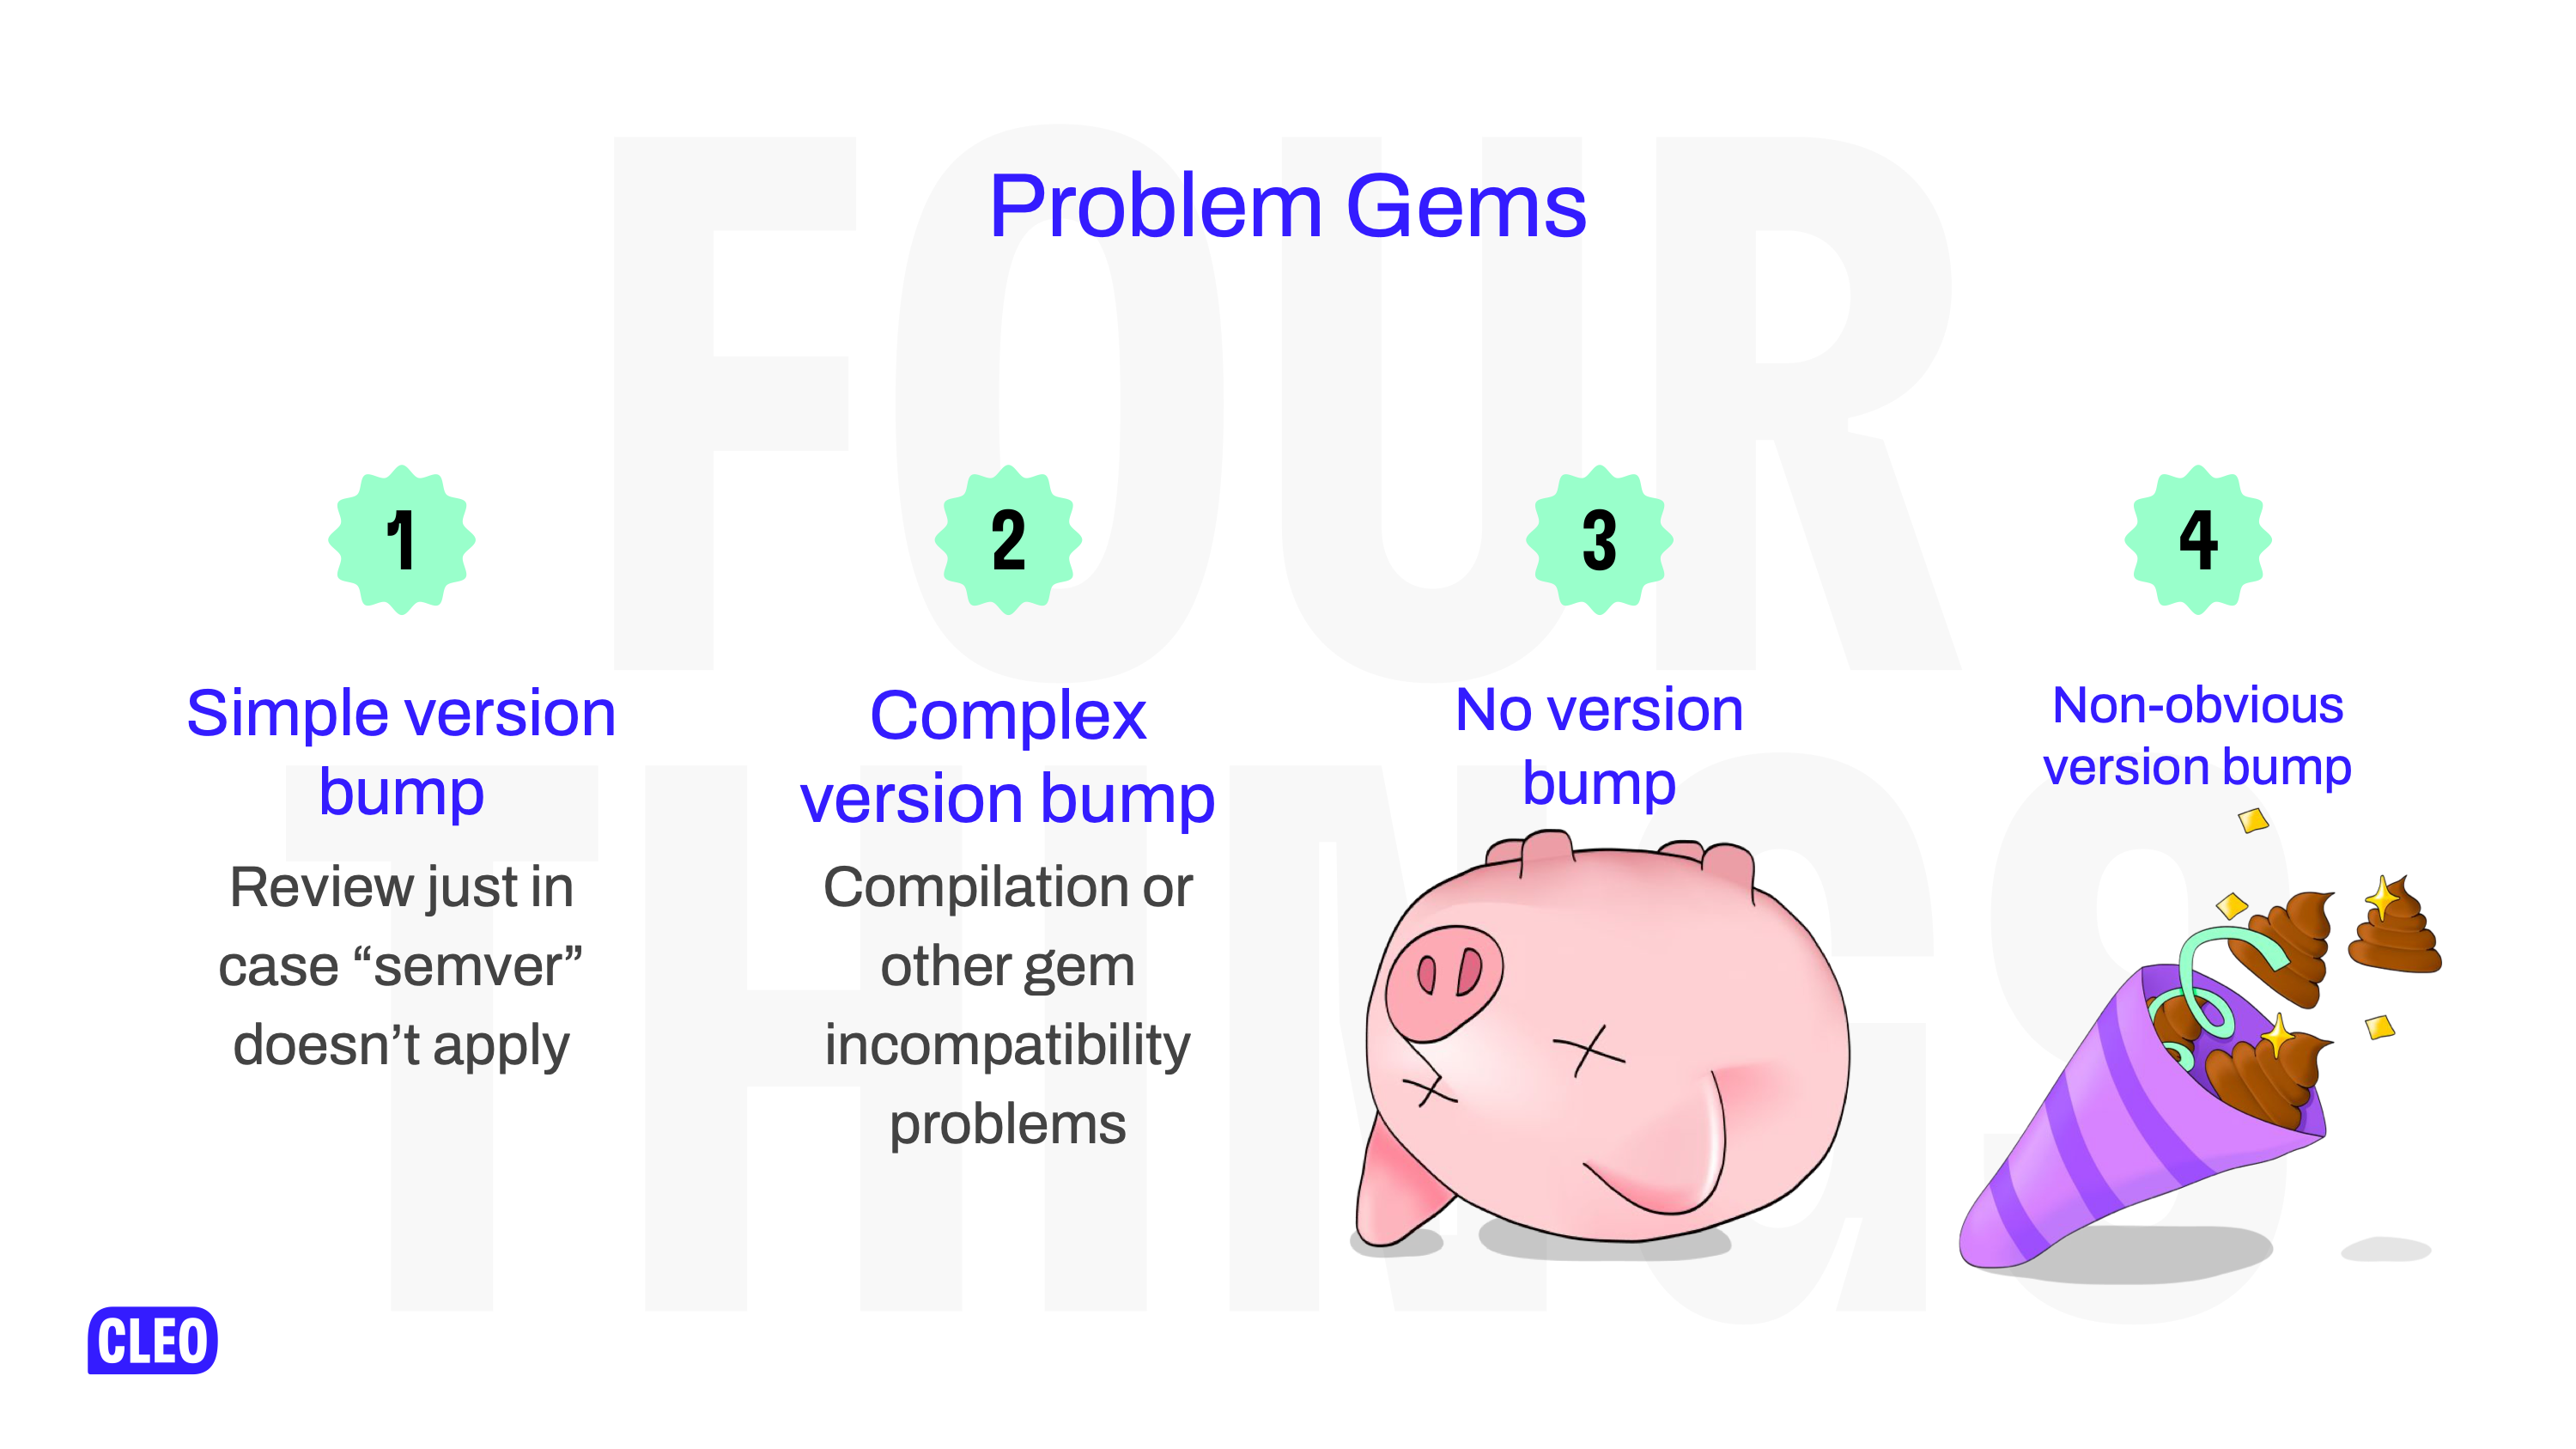 The same as Slide 9, but with a fourth point - gems that have no obvious version bump, with a picture of poop-confetti canon as a hint to what this feels like, text: Problem gems, 4: non-obvious version bump